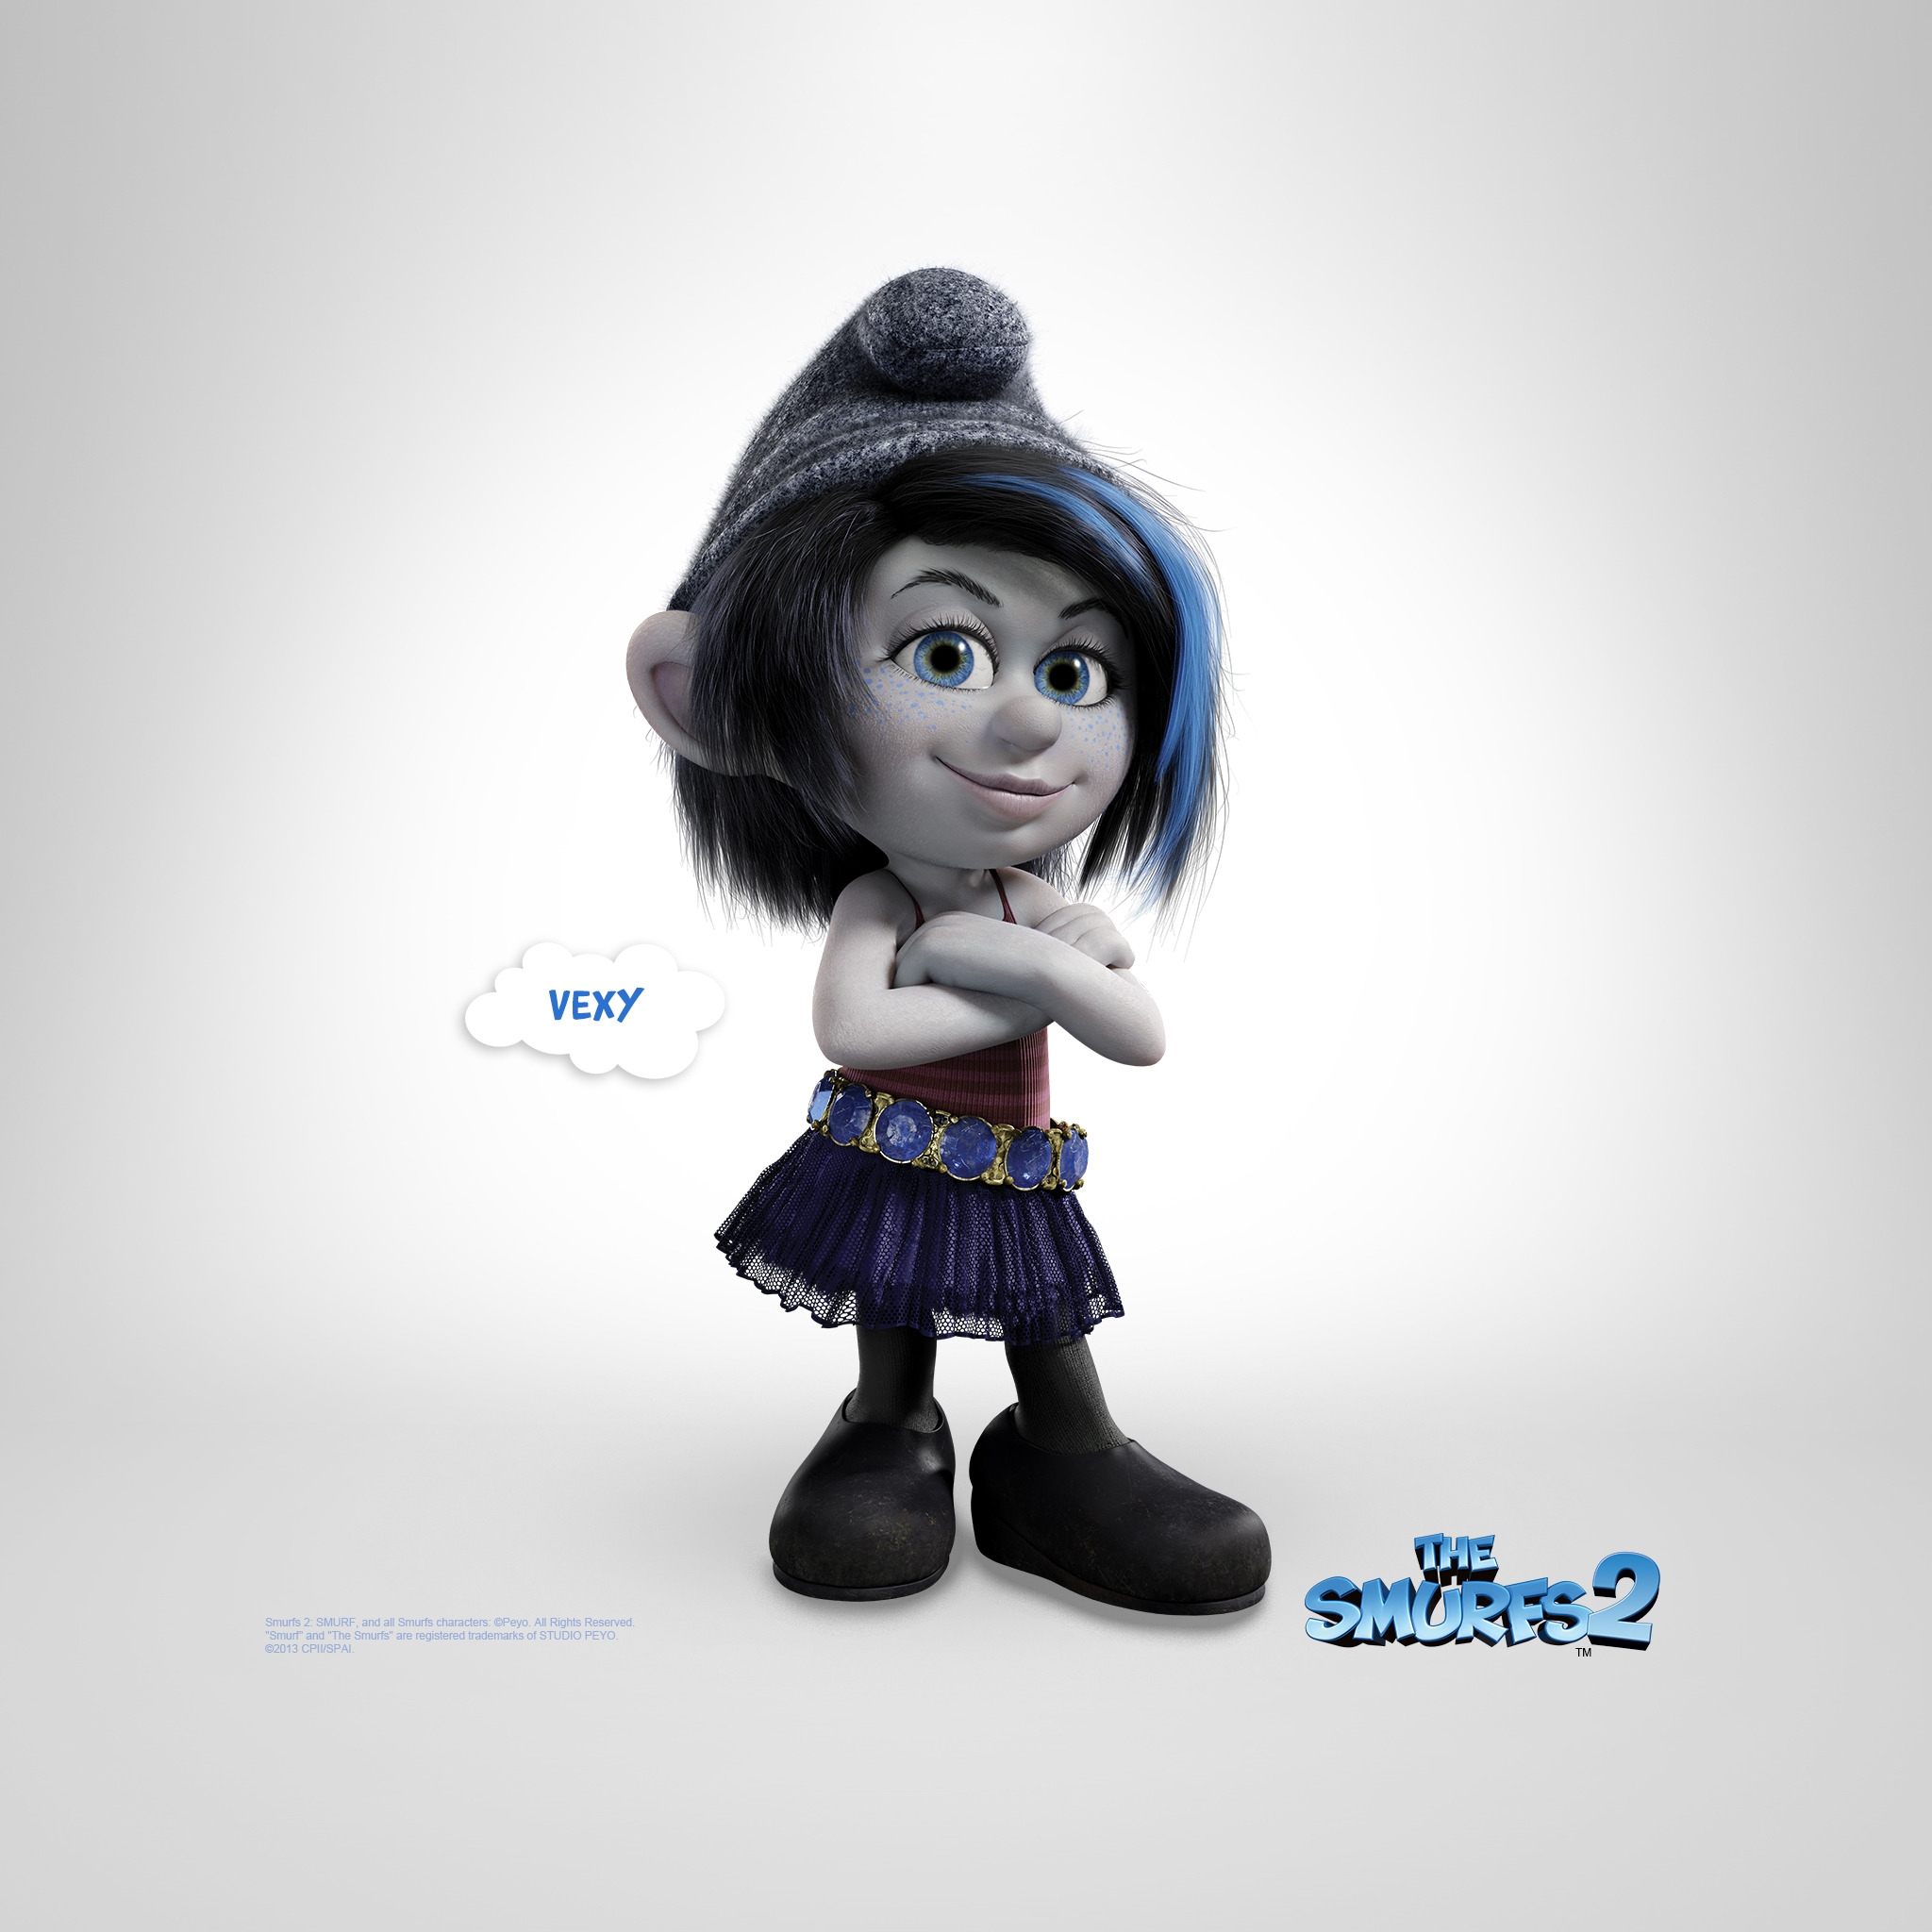 Vexy The Smurfs 2 for 2048 x 2048 New iPad resolution